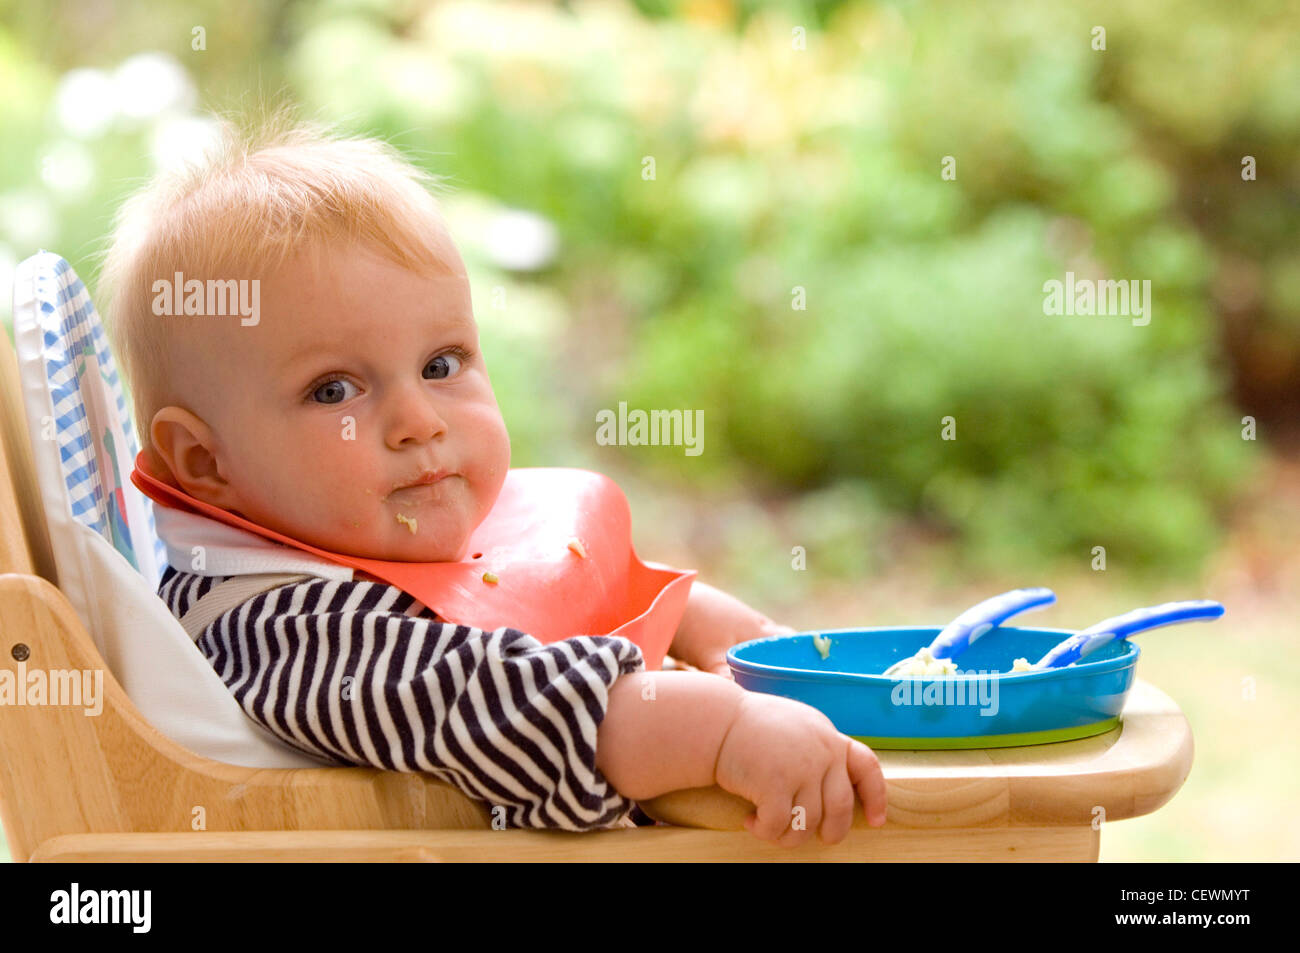 Blonde male child aged months wearing a black and white stripey top and an orange bib, sitting in a high chair a bowl of food Stock Photo